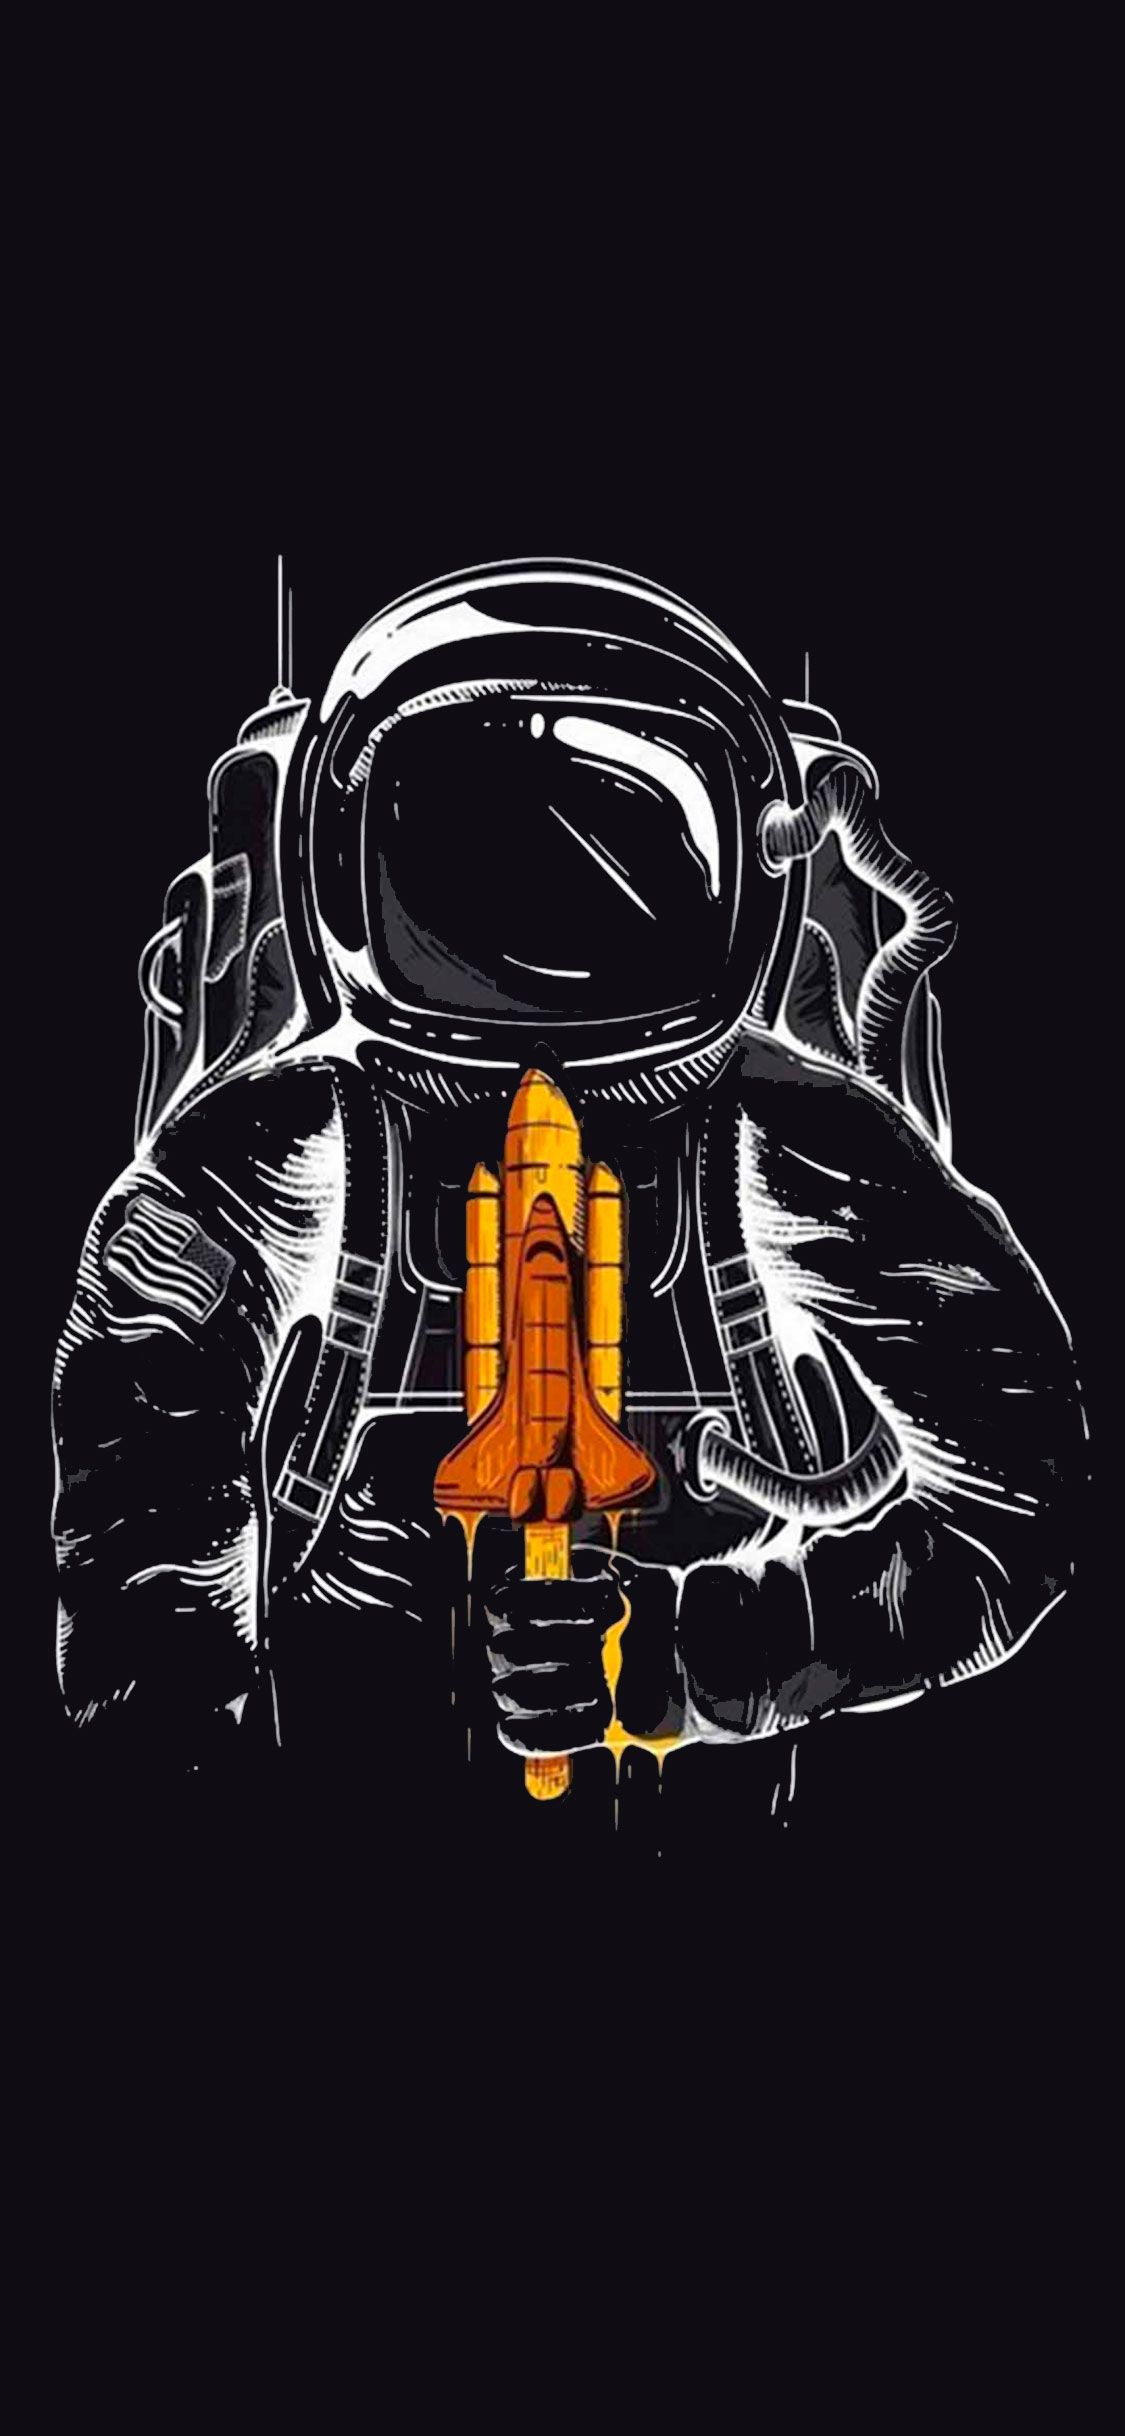 Astronaut Wallpaper for iPhone Pro Max, X, 6